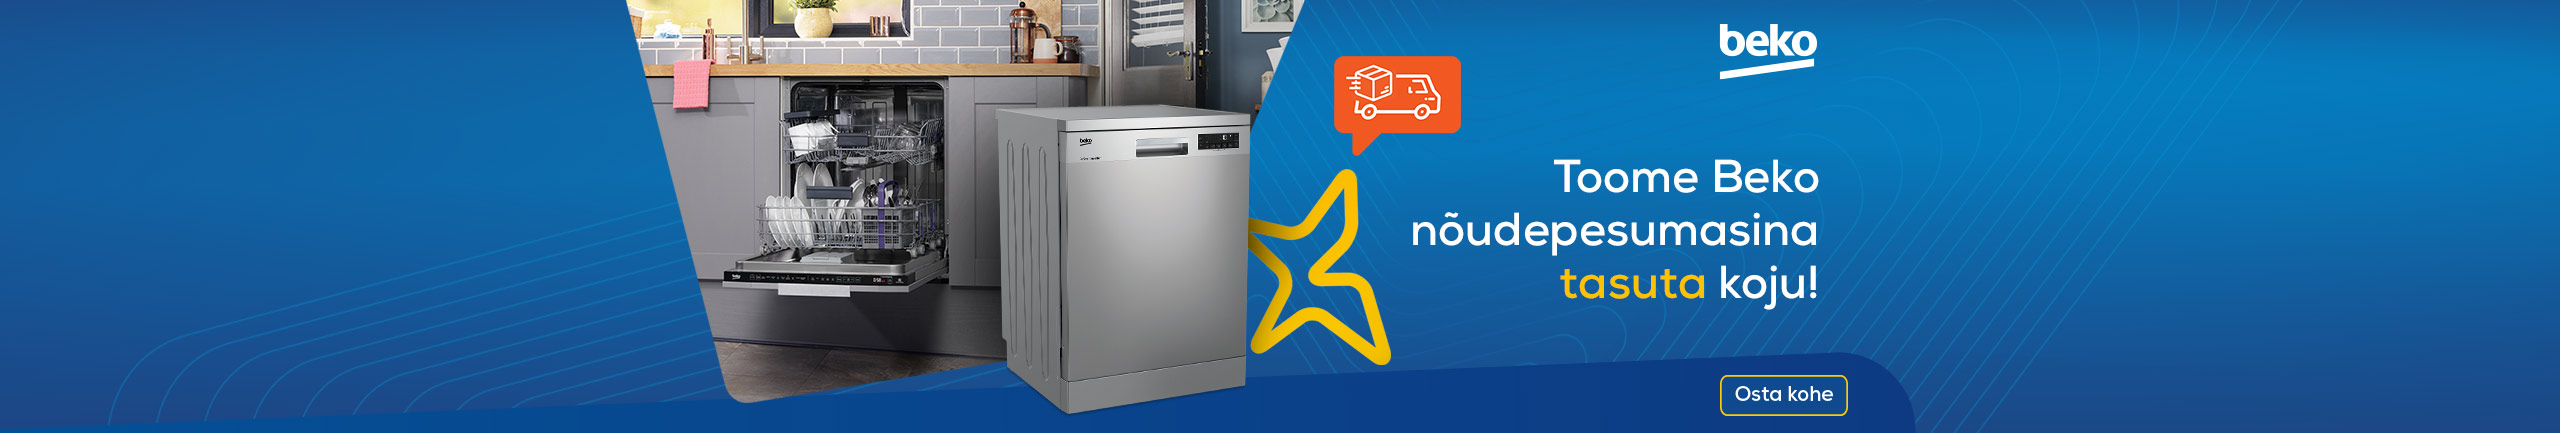 Free delivery for Beko dishwashers!